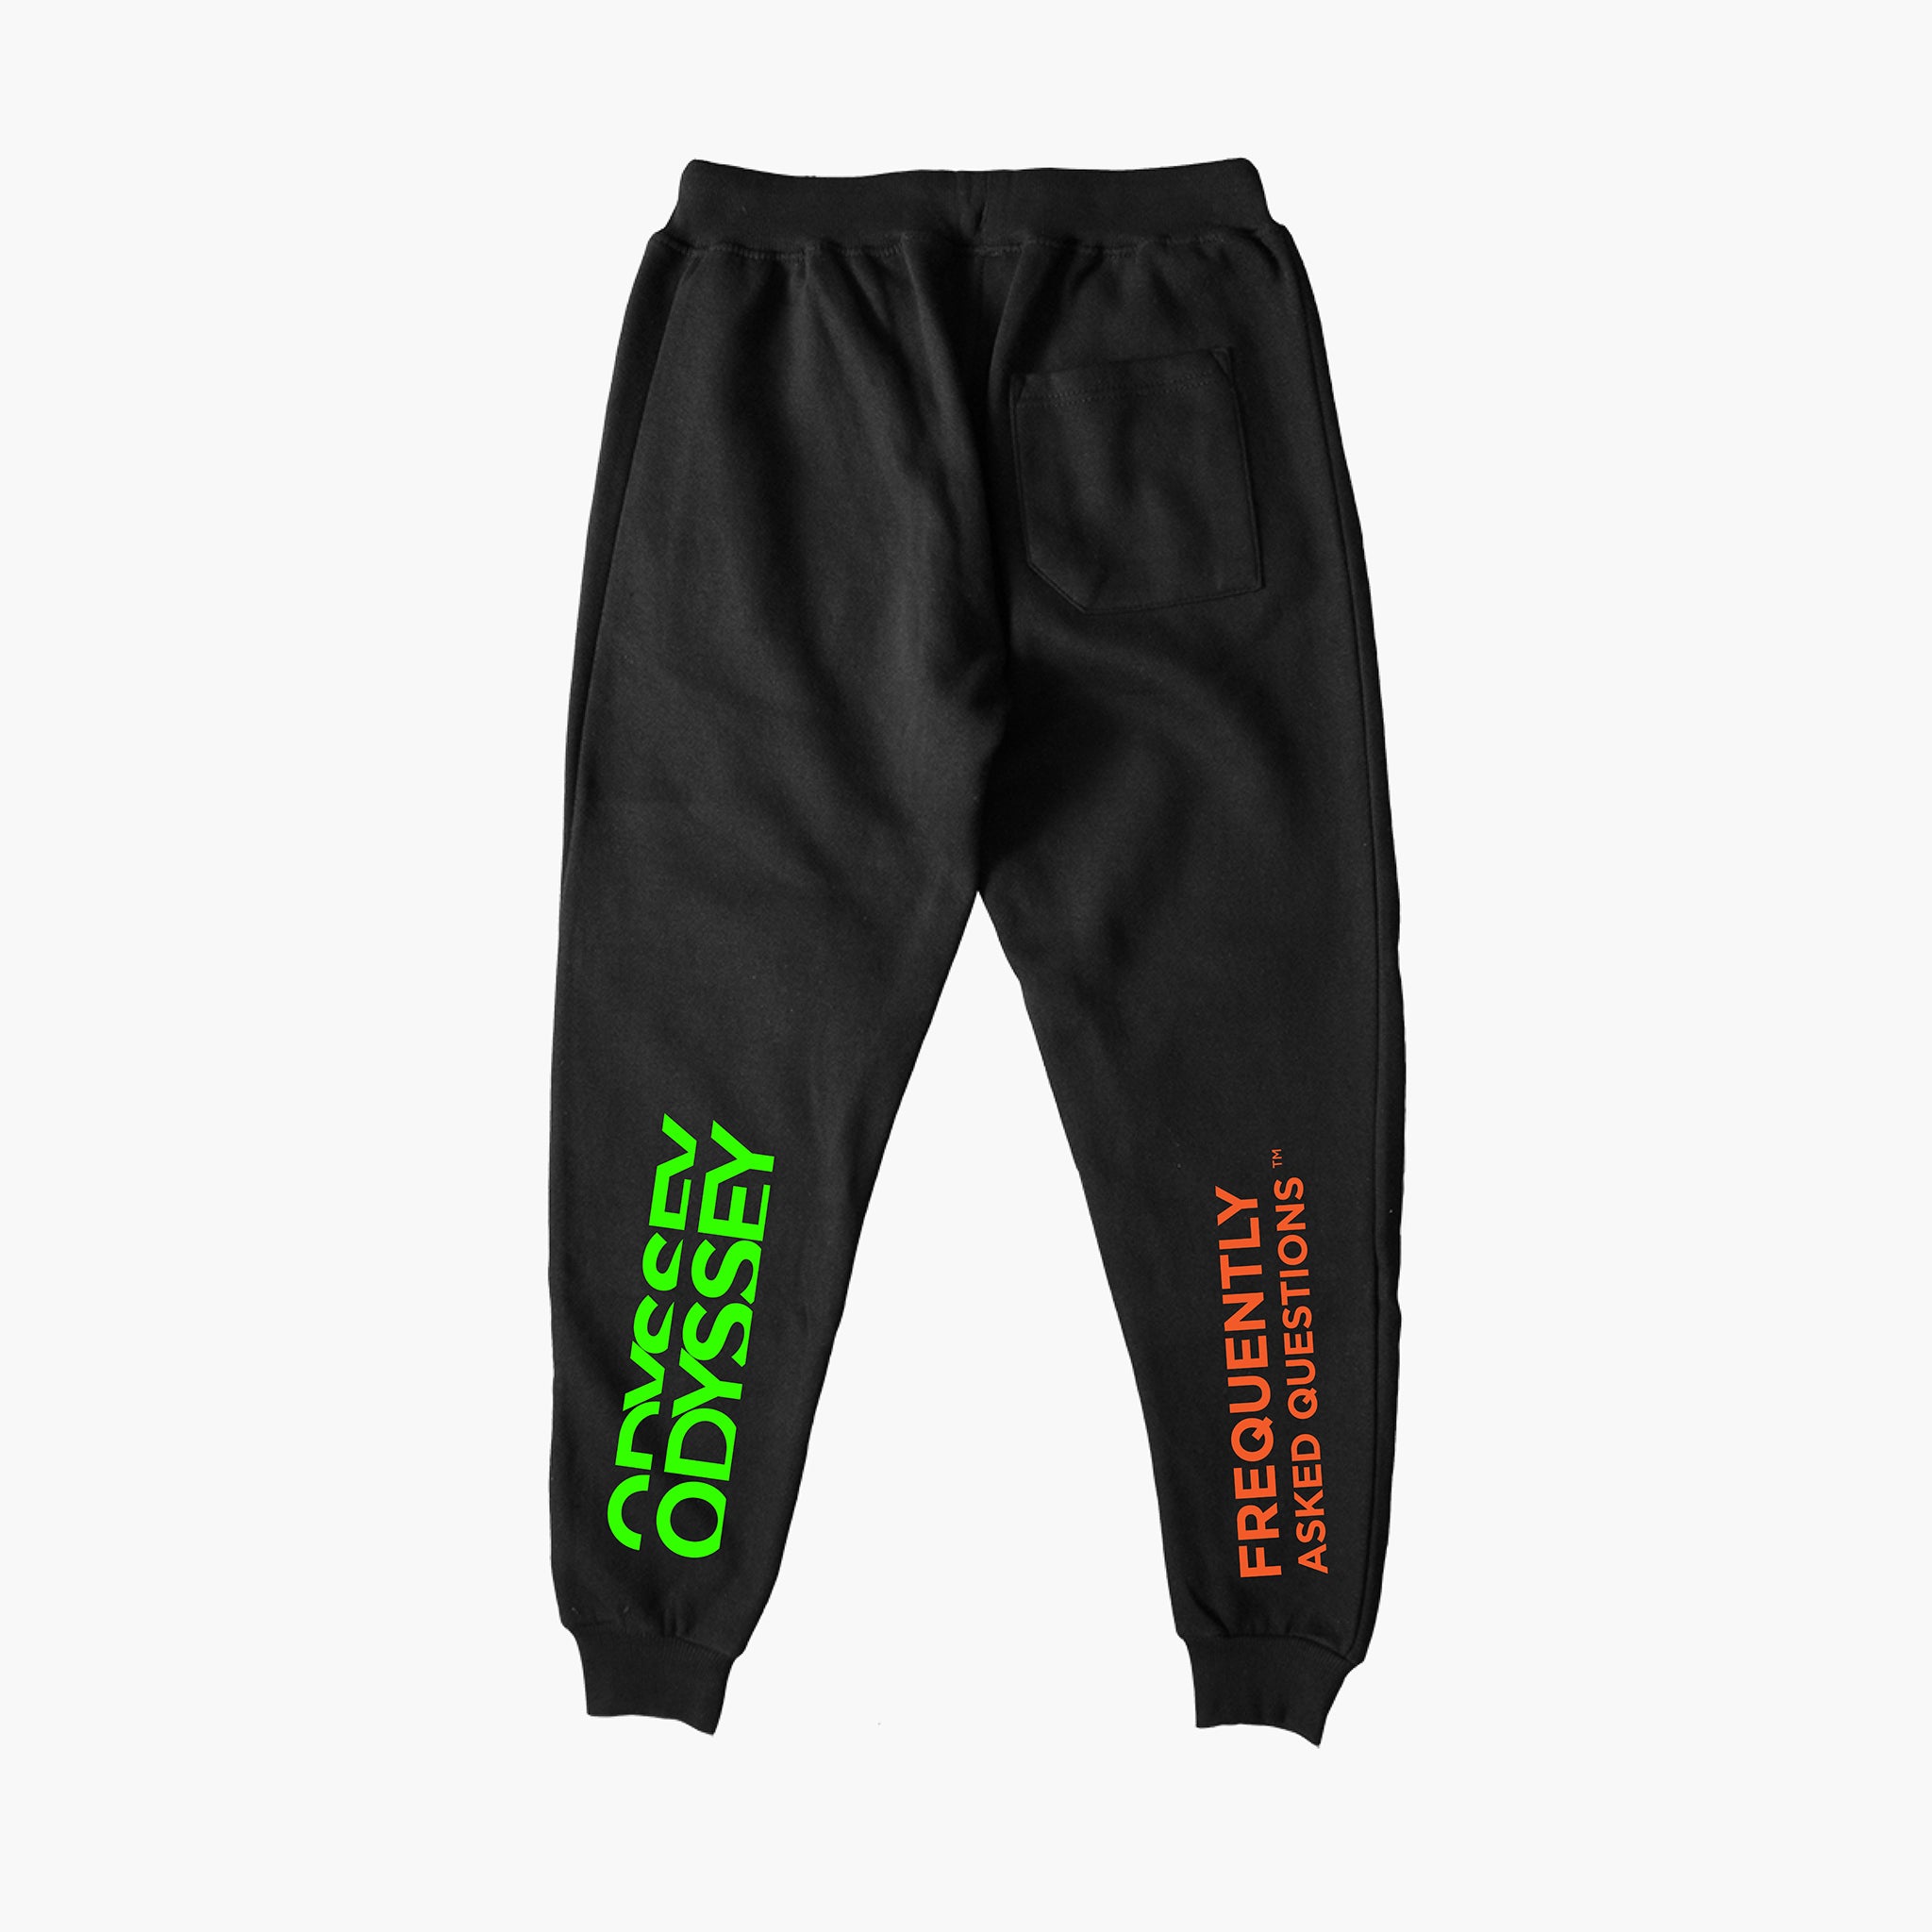 Odyssey Joggers - Frequently Asked Questions